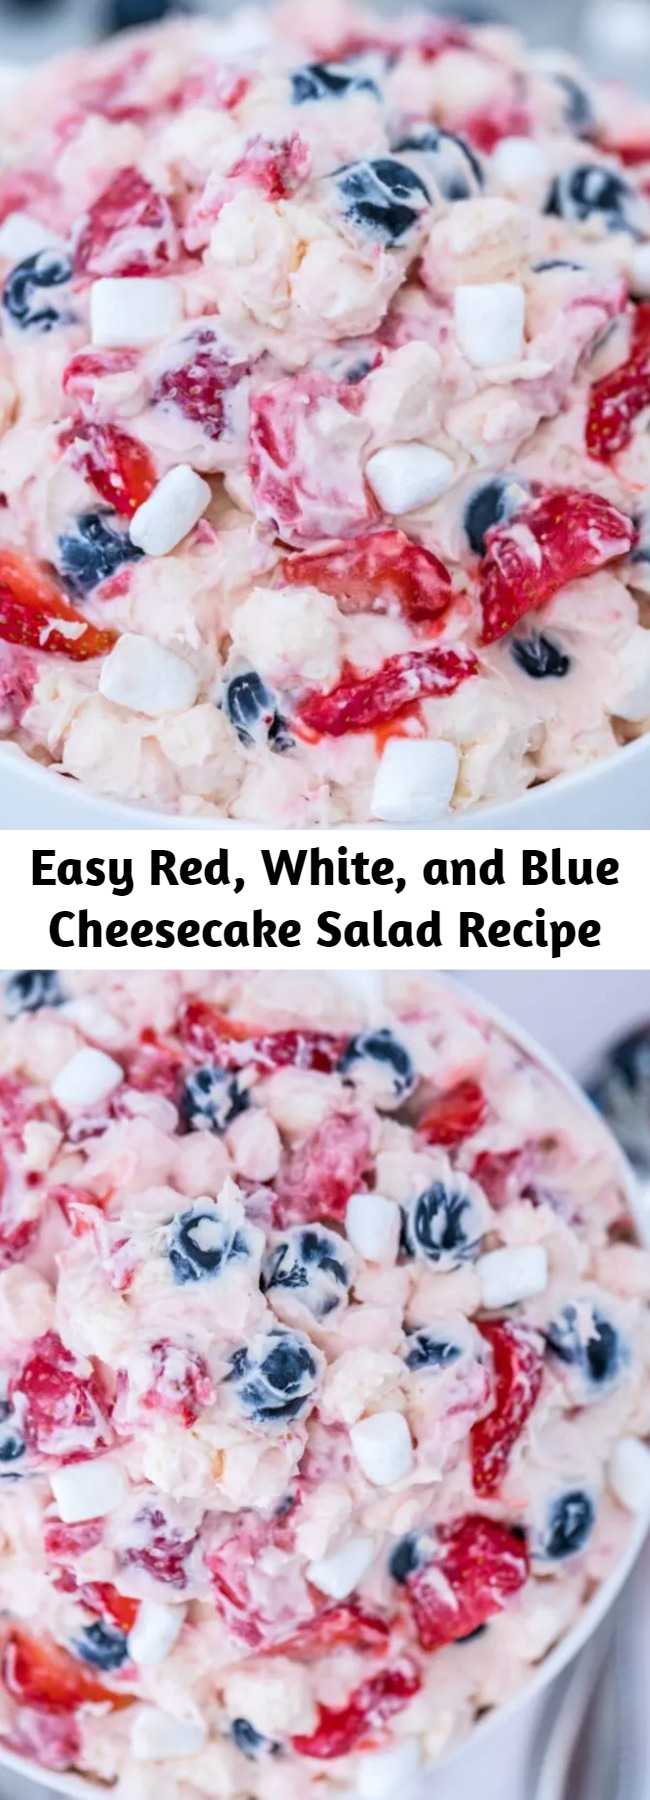 Easy Red, White, and Blue Cheesecake Salad Recipe - Red, White, and Blue Cheesecake Salad is the perfect patriotic dessert to enjoy for Memorial Day or Independence Day. It is made with fresh fruits and is super delicious. #redwhiteandblue #cheesecake #saladrecipes #patriotic